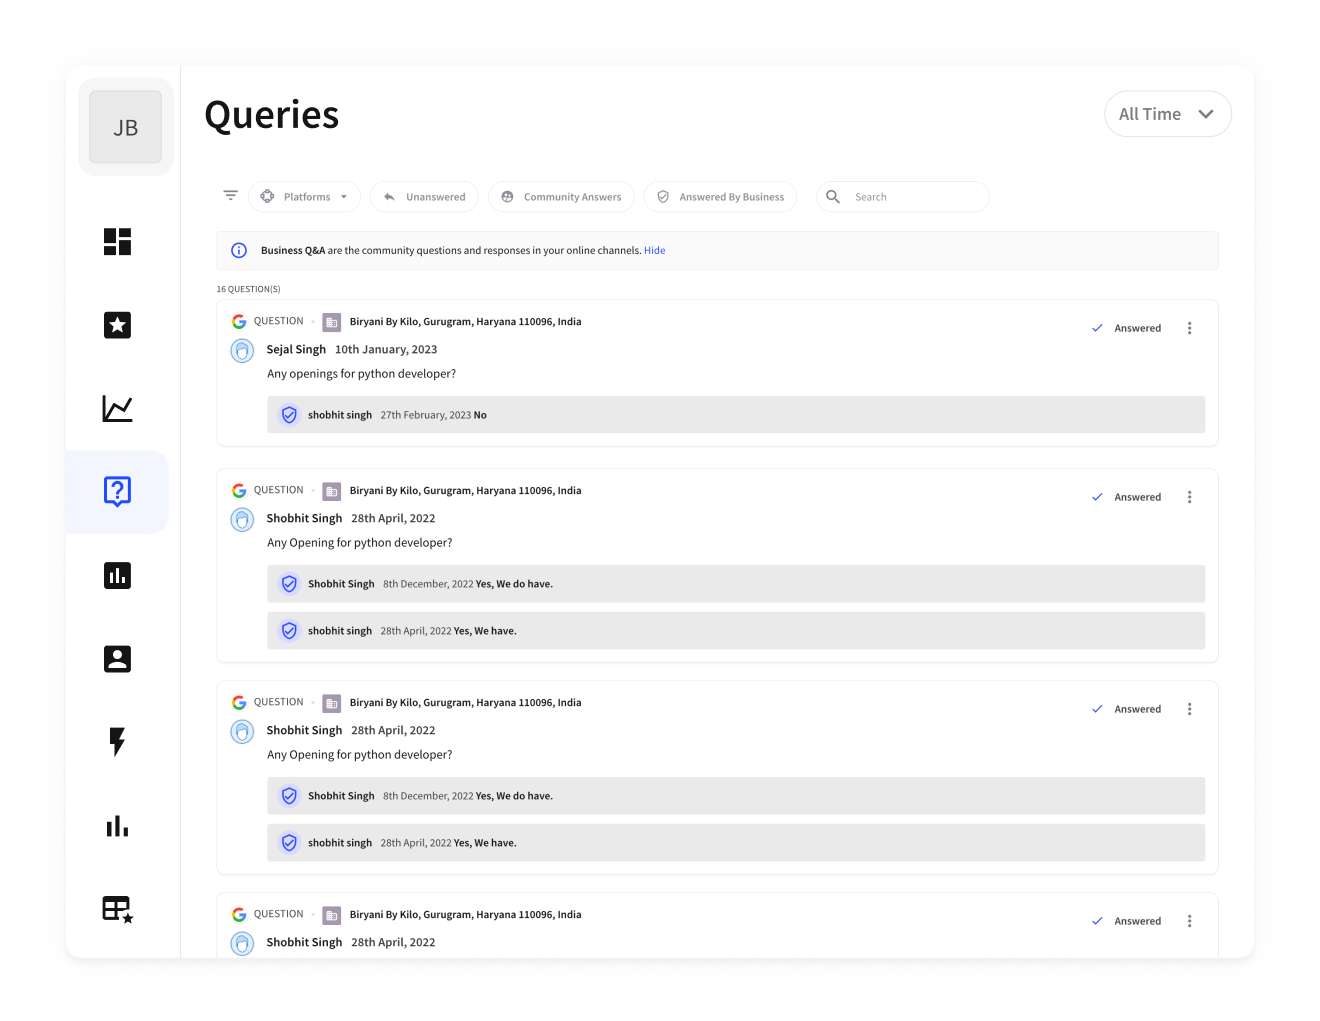 Customer query management interface showing a list of inquiries and responses, filtered by answered status and platform, for efficient online community engagement.